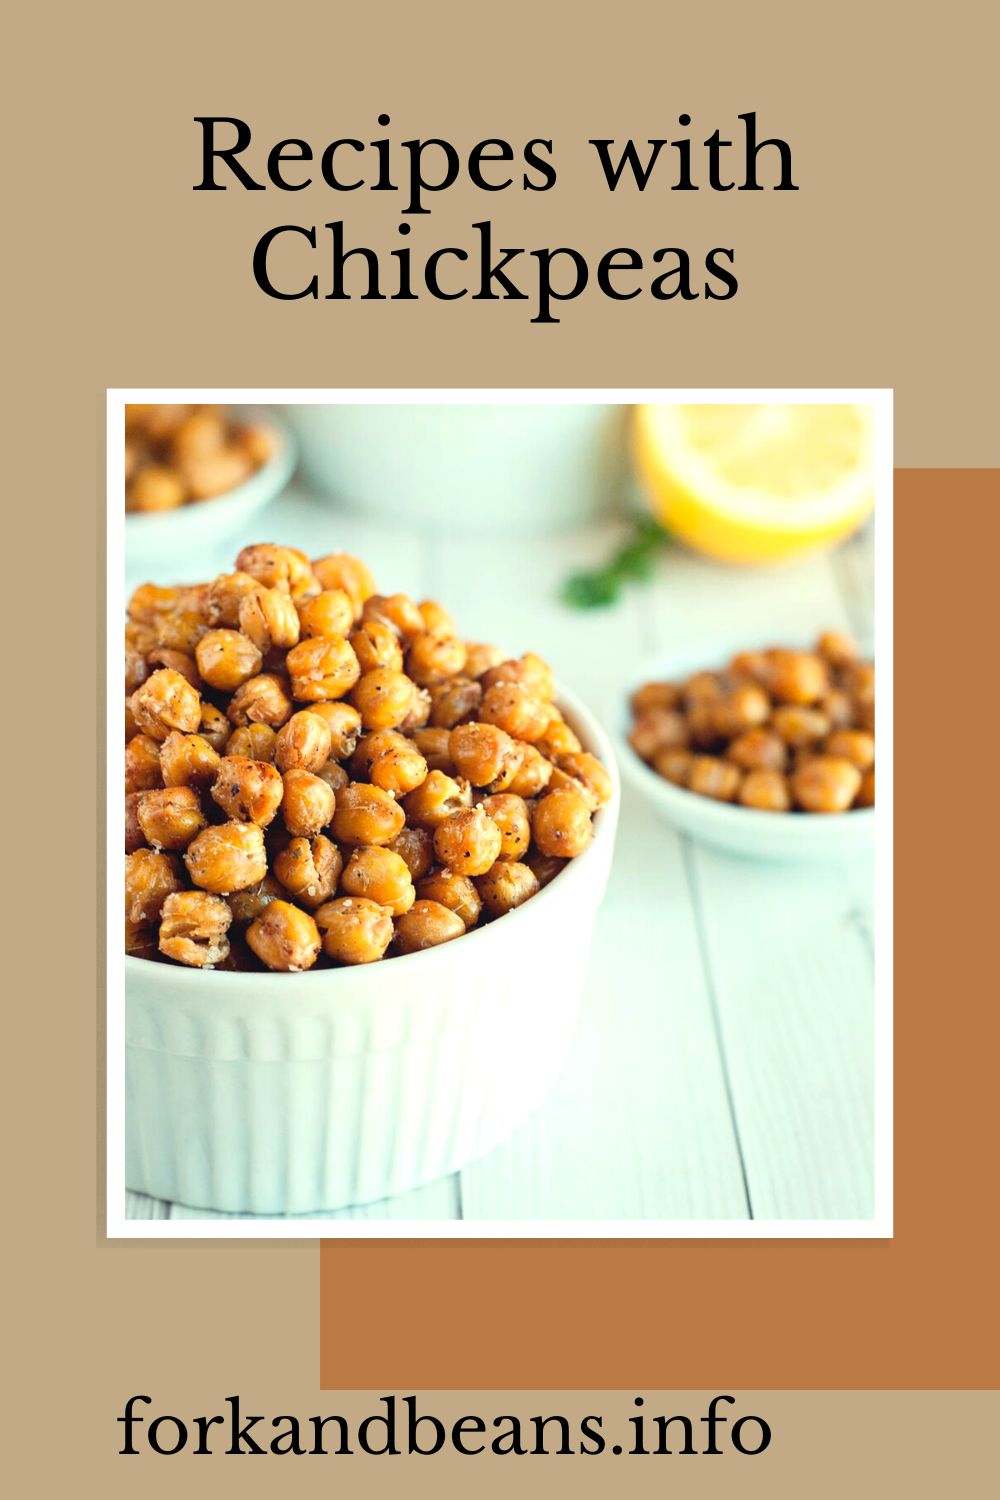 A RECIPE FOR MEDIEVAL ROASTED CHICKPEAS